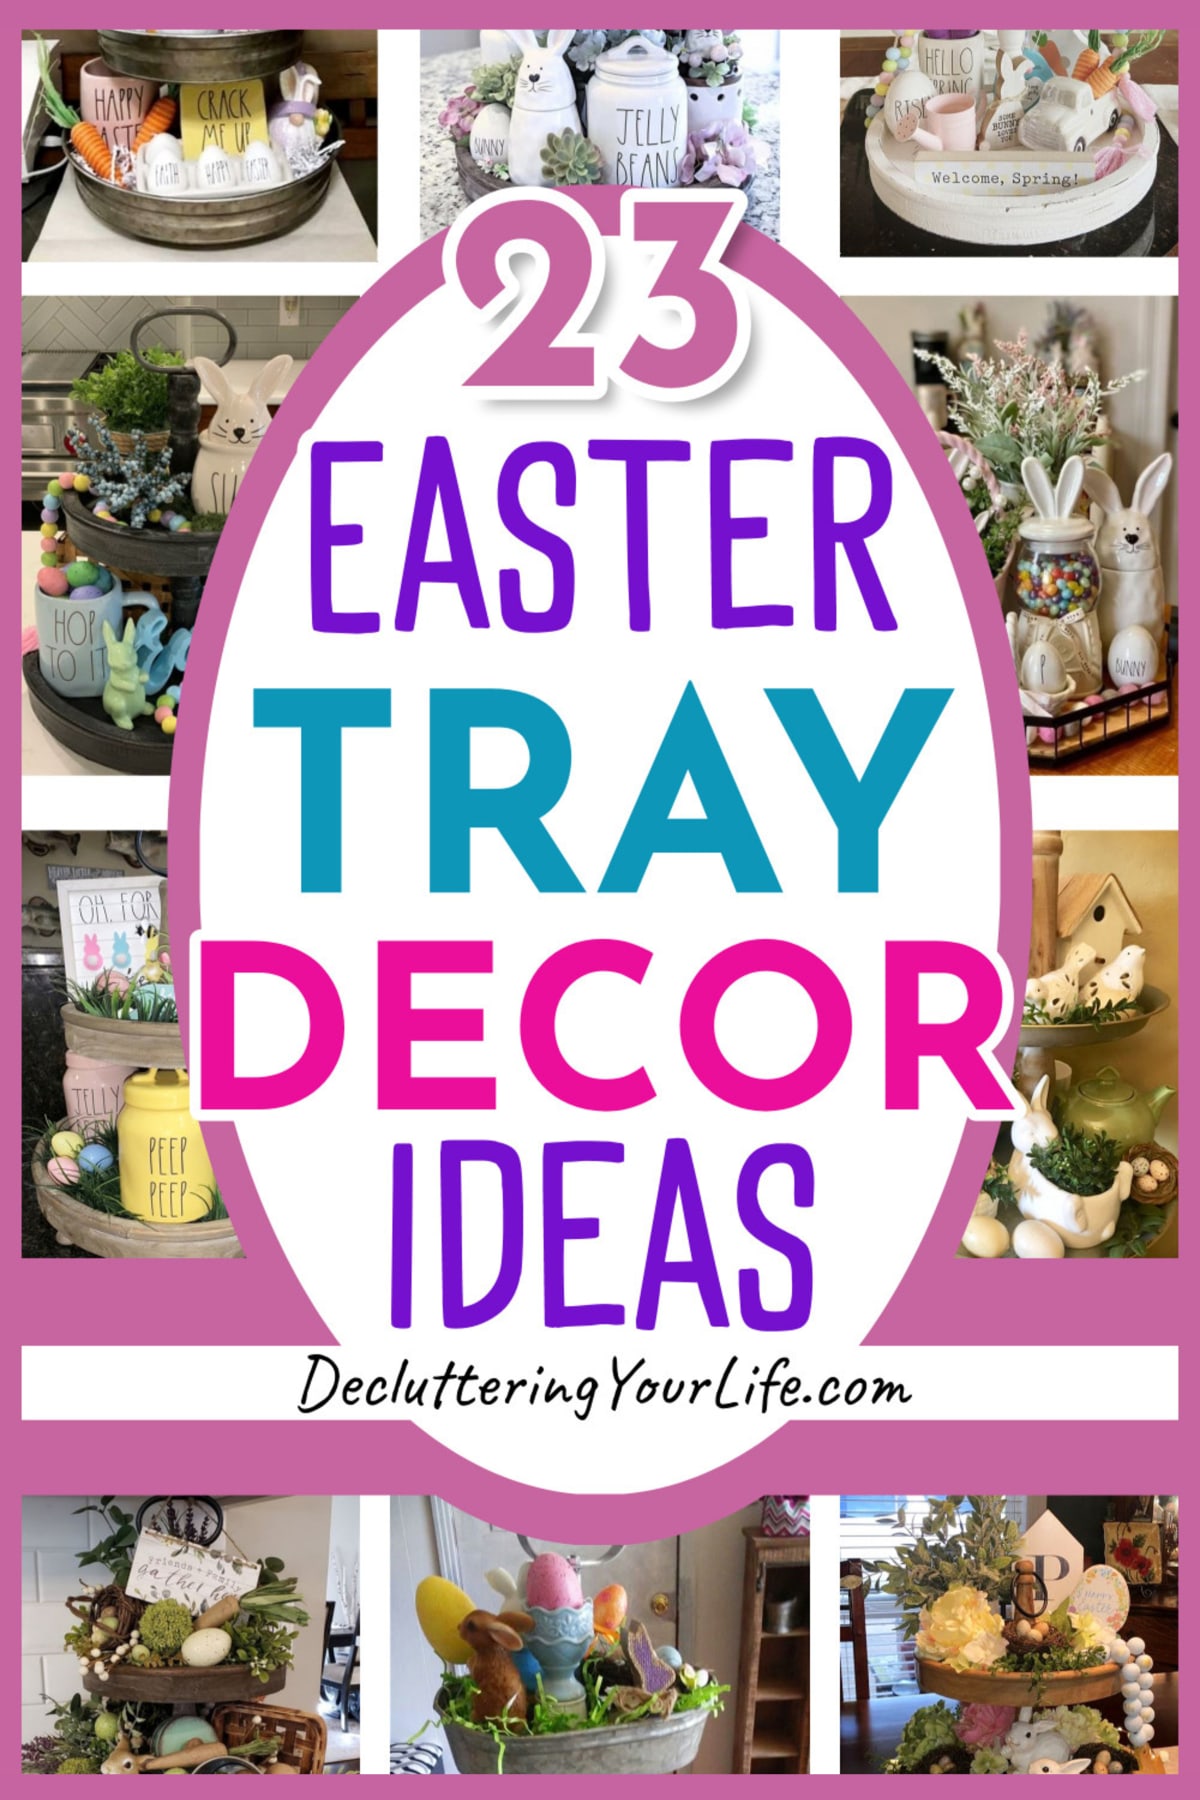 Easter Decor Ideas You Can DIY For Spring - Easter Tiered Tray and Wood Tray Decor Ideas With Springtime Decorations